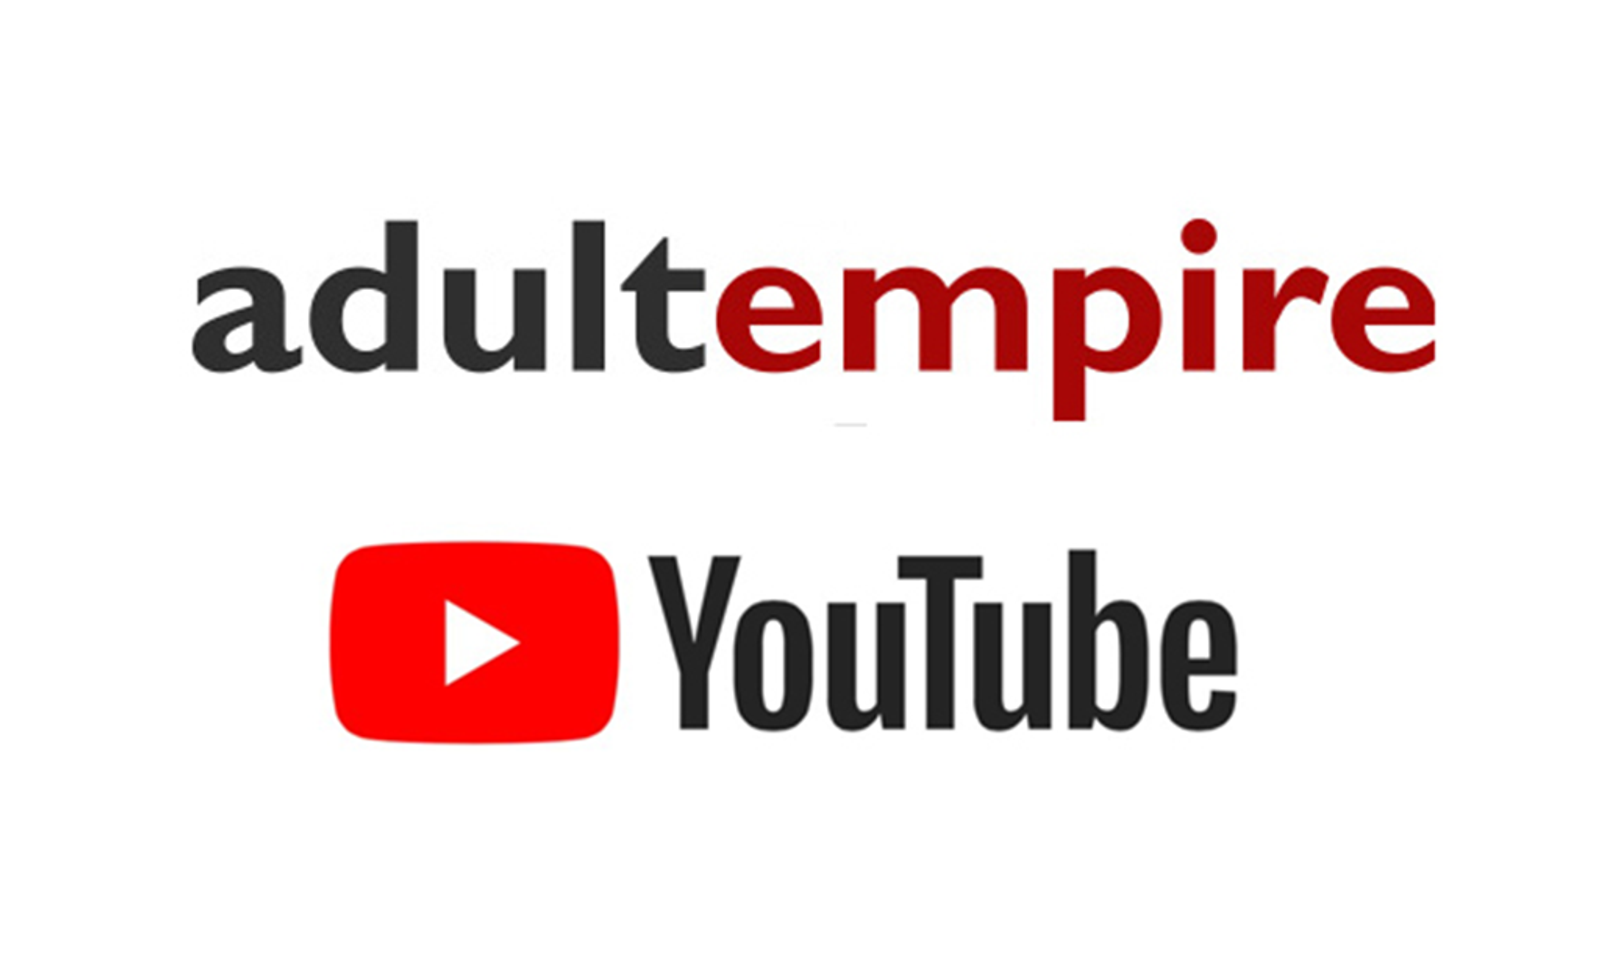 Adult Empire YouTube Channel Now Has More Than 150K Subscribers